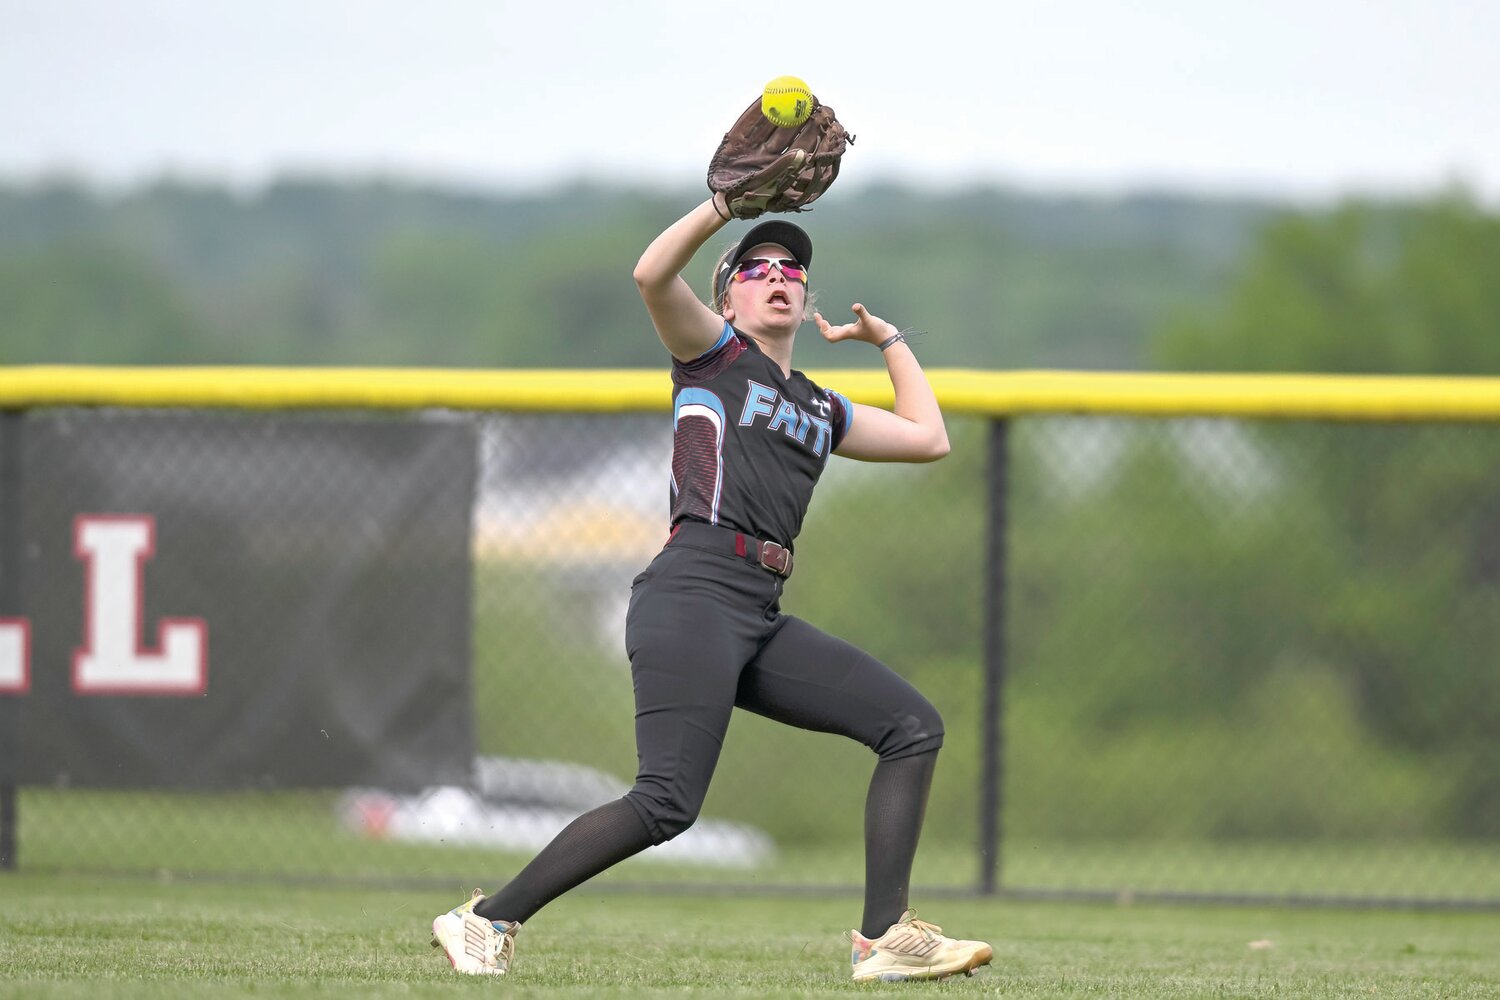 Faith Christian’s Lexi Reed tracks down a fly ball in the second inning.